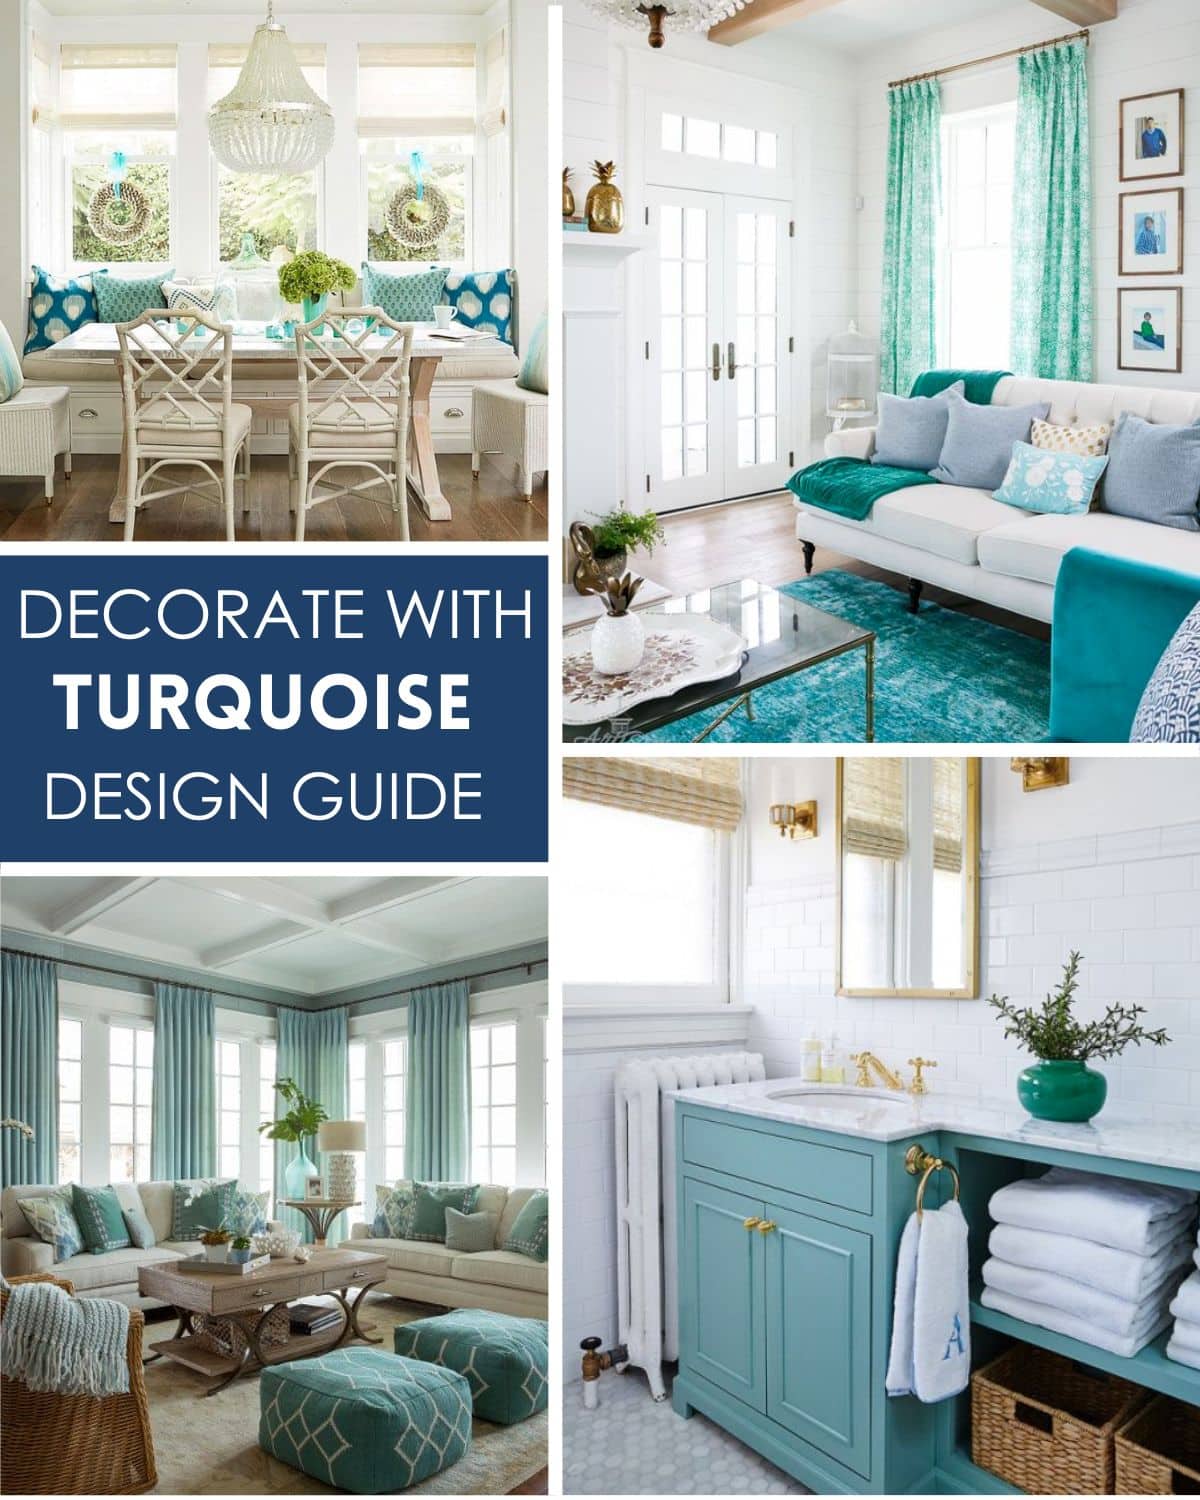 how to decorate with turquoise - 5 design tips - a blissful nest